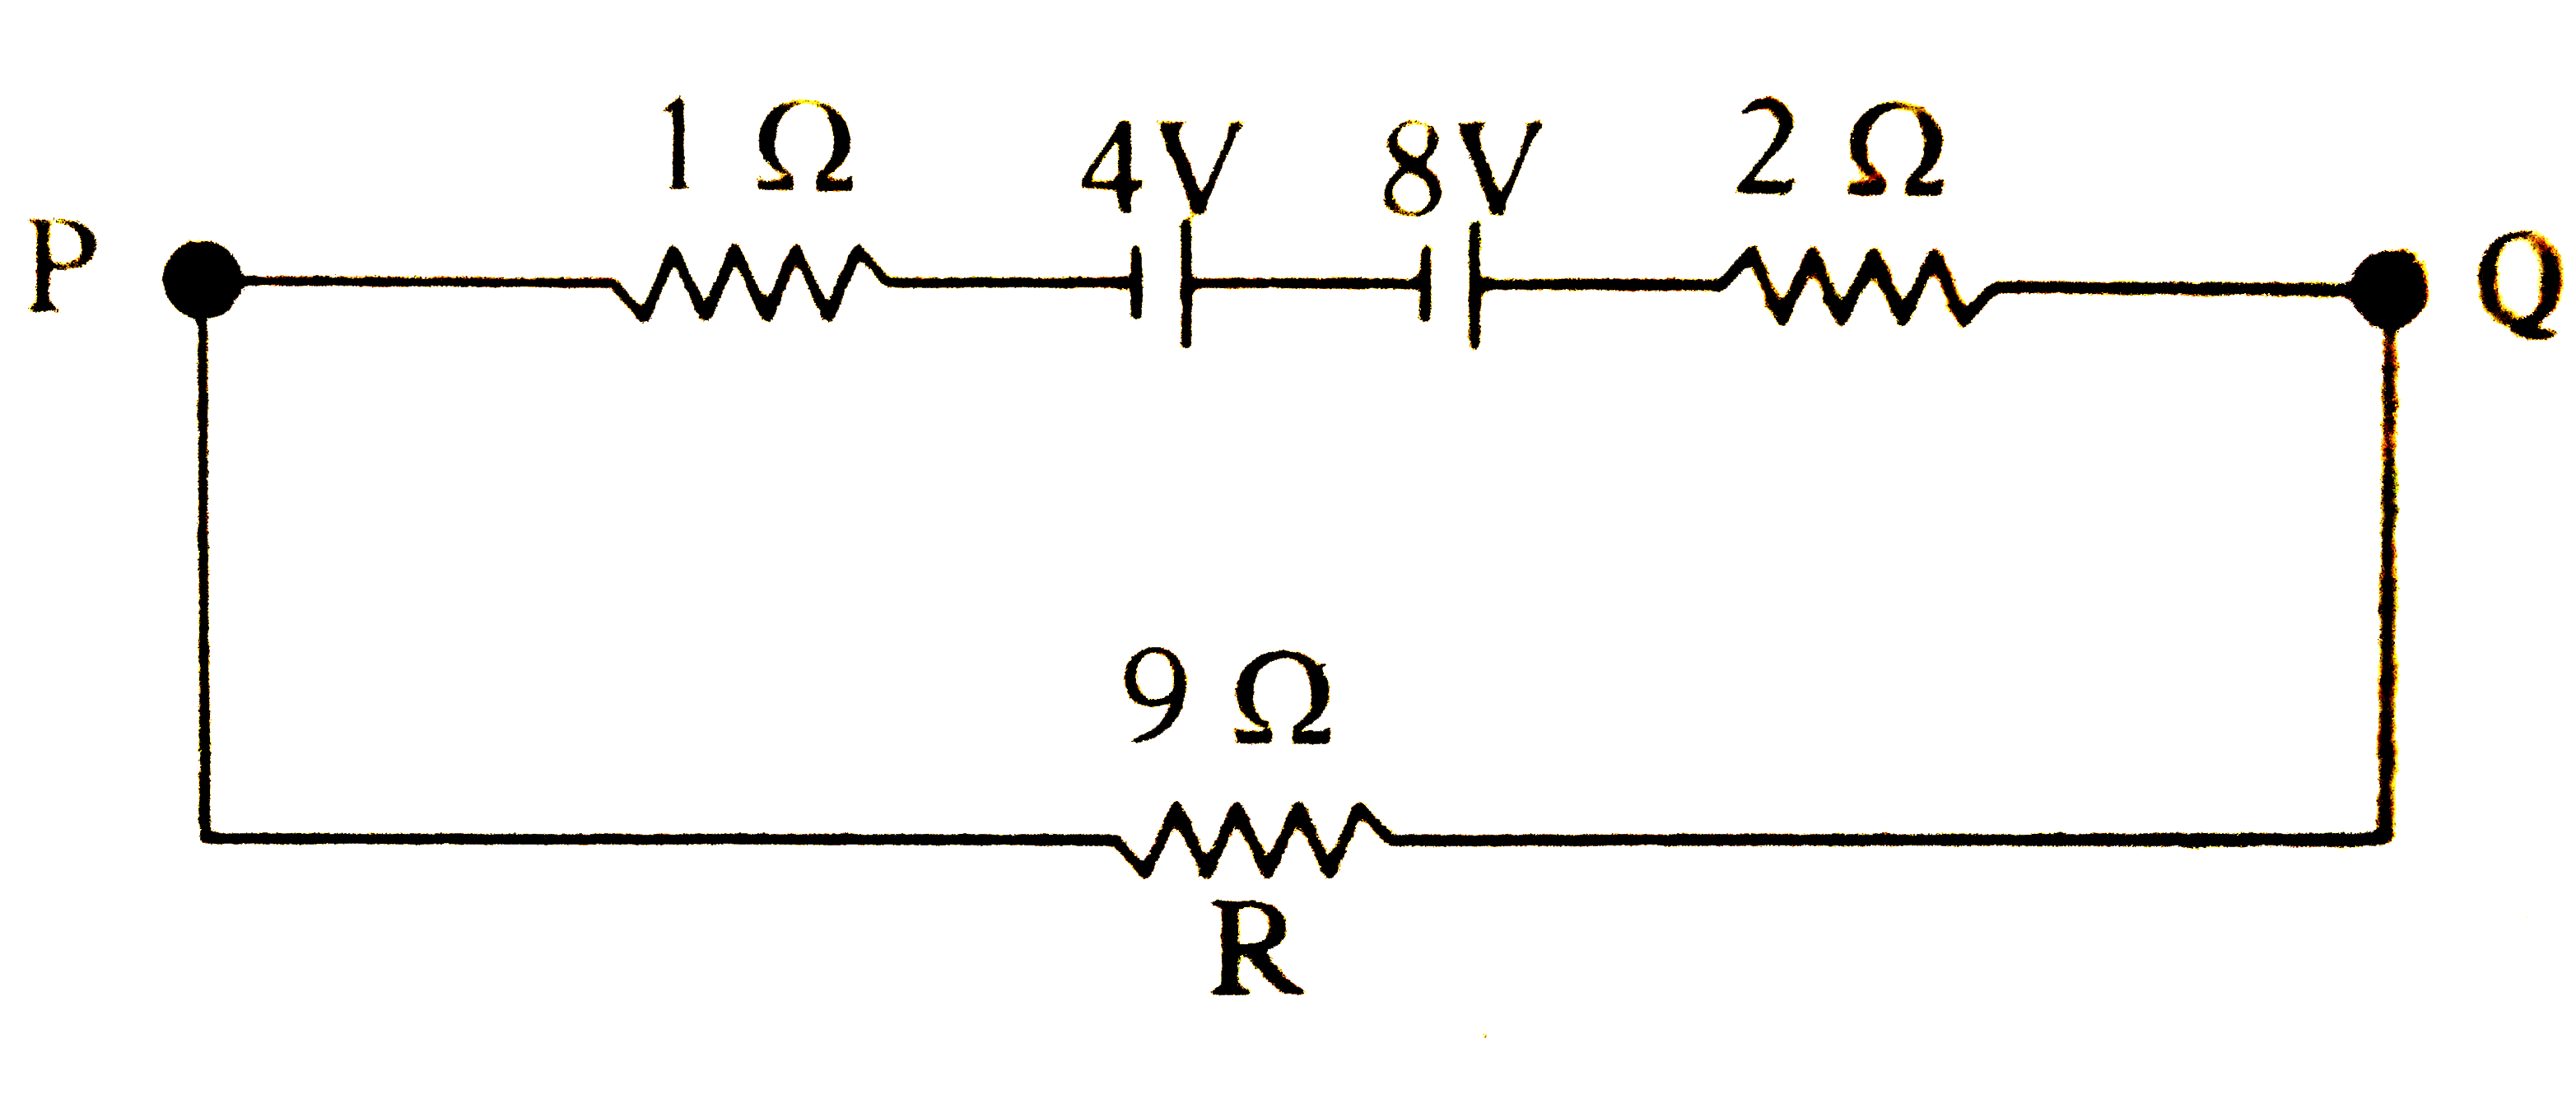 Two batteries of e.m.f4 V and 8 V with internal resistance of 1 Omega  and 2 Omega   are connected in a circuit with a resistance of 9 Omega  as shown in the figure . The current and potential difference between the point P and Q are